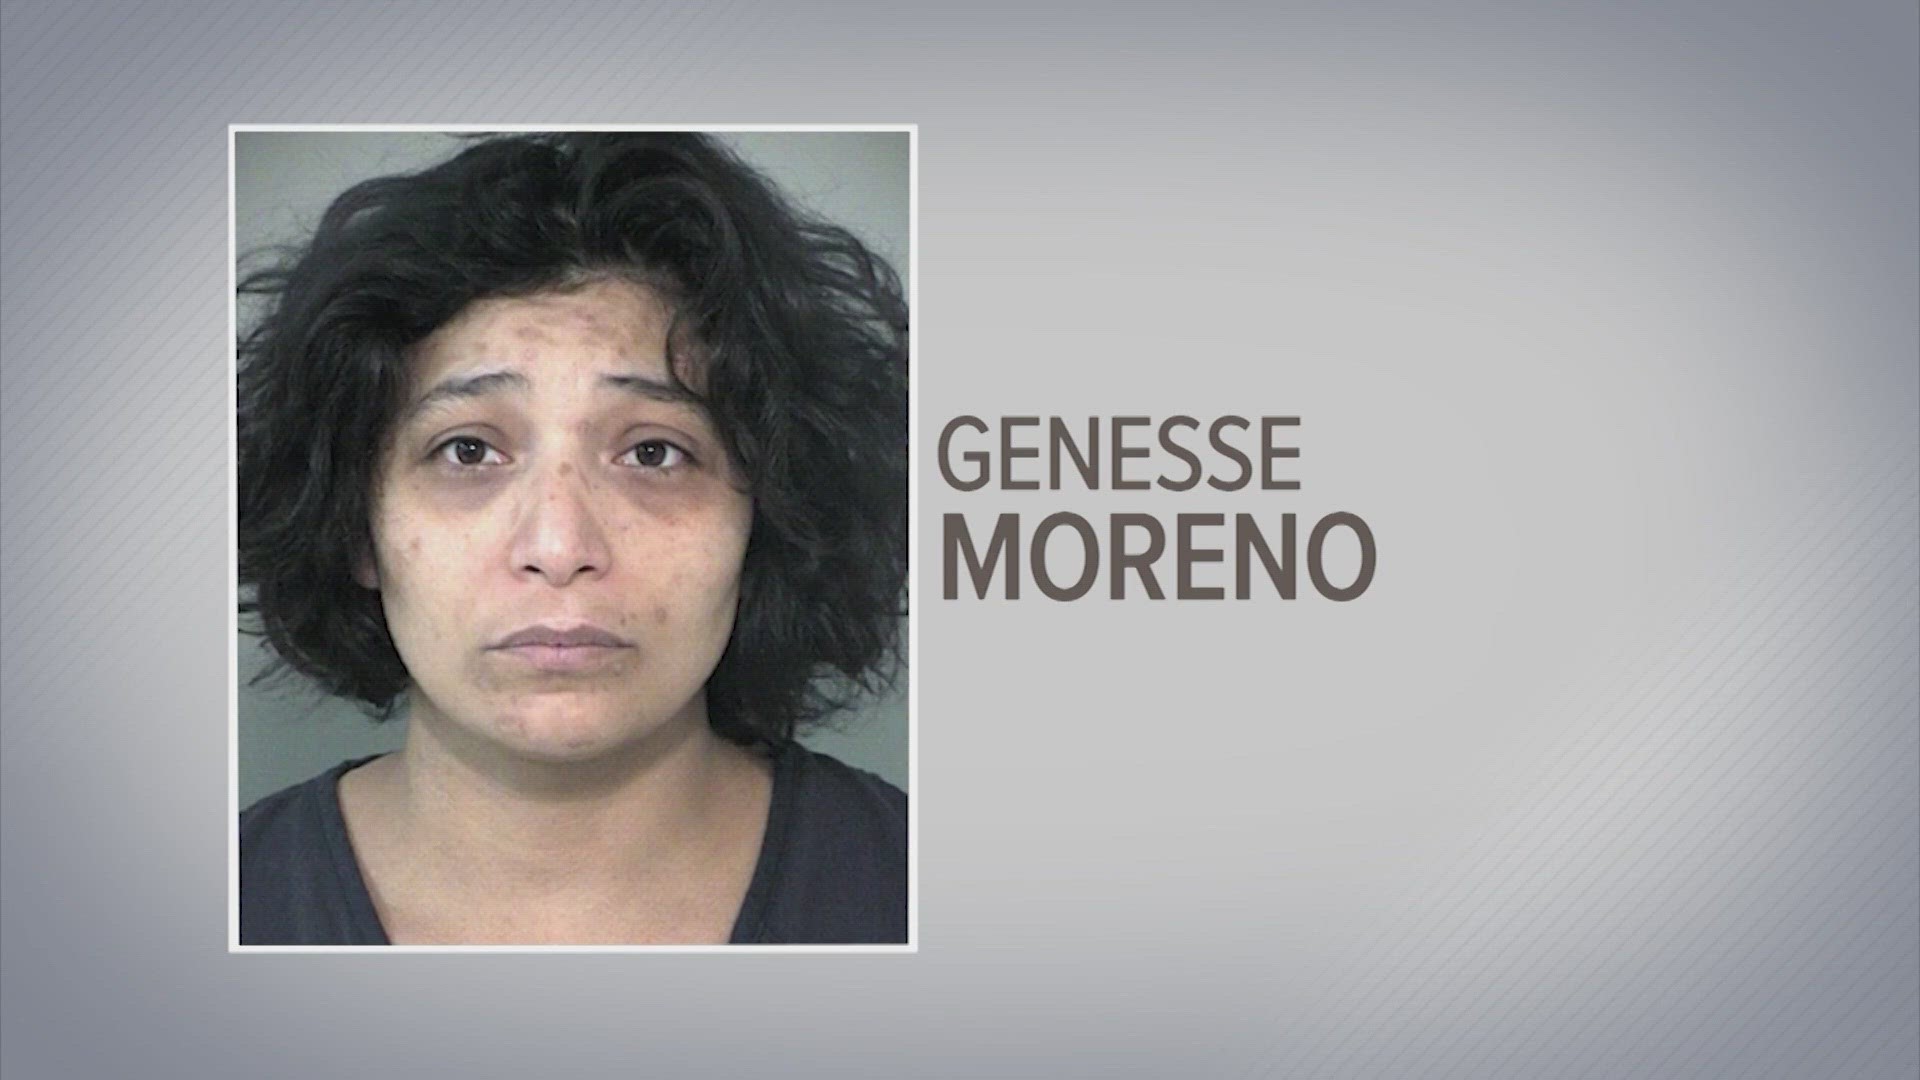 Forty-nine pages of documents detail the calls for service to Genesse Moreno's home, which include harassment and threats.